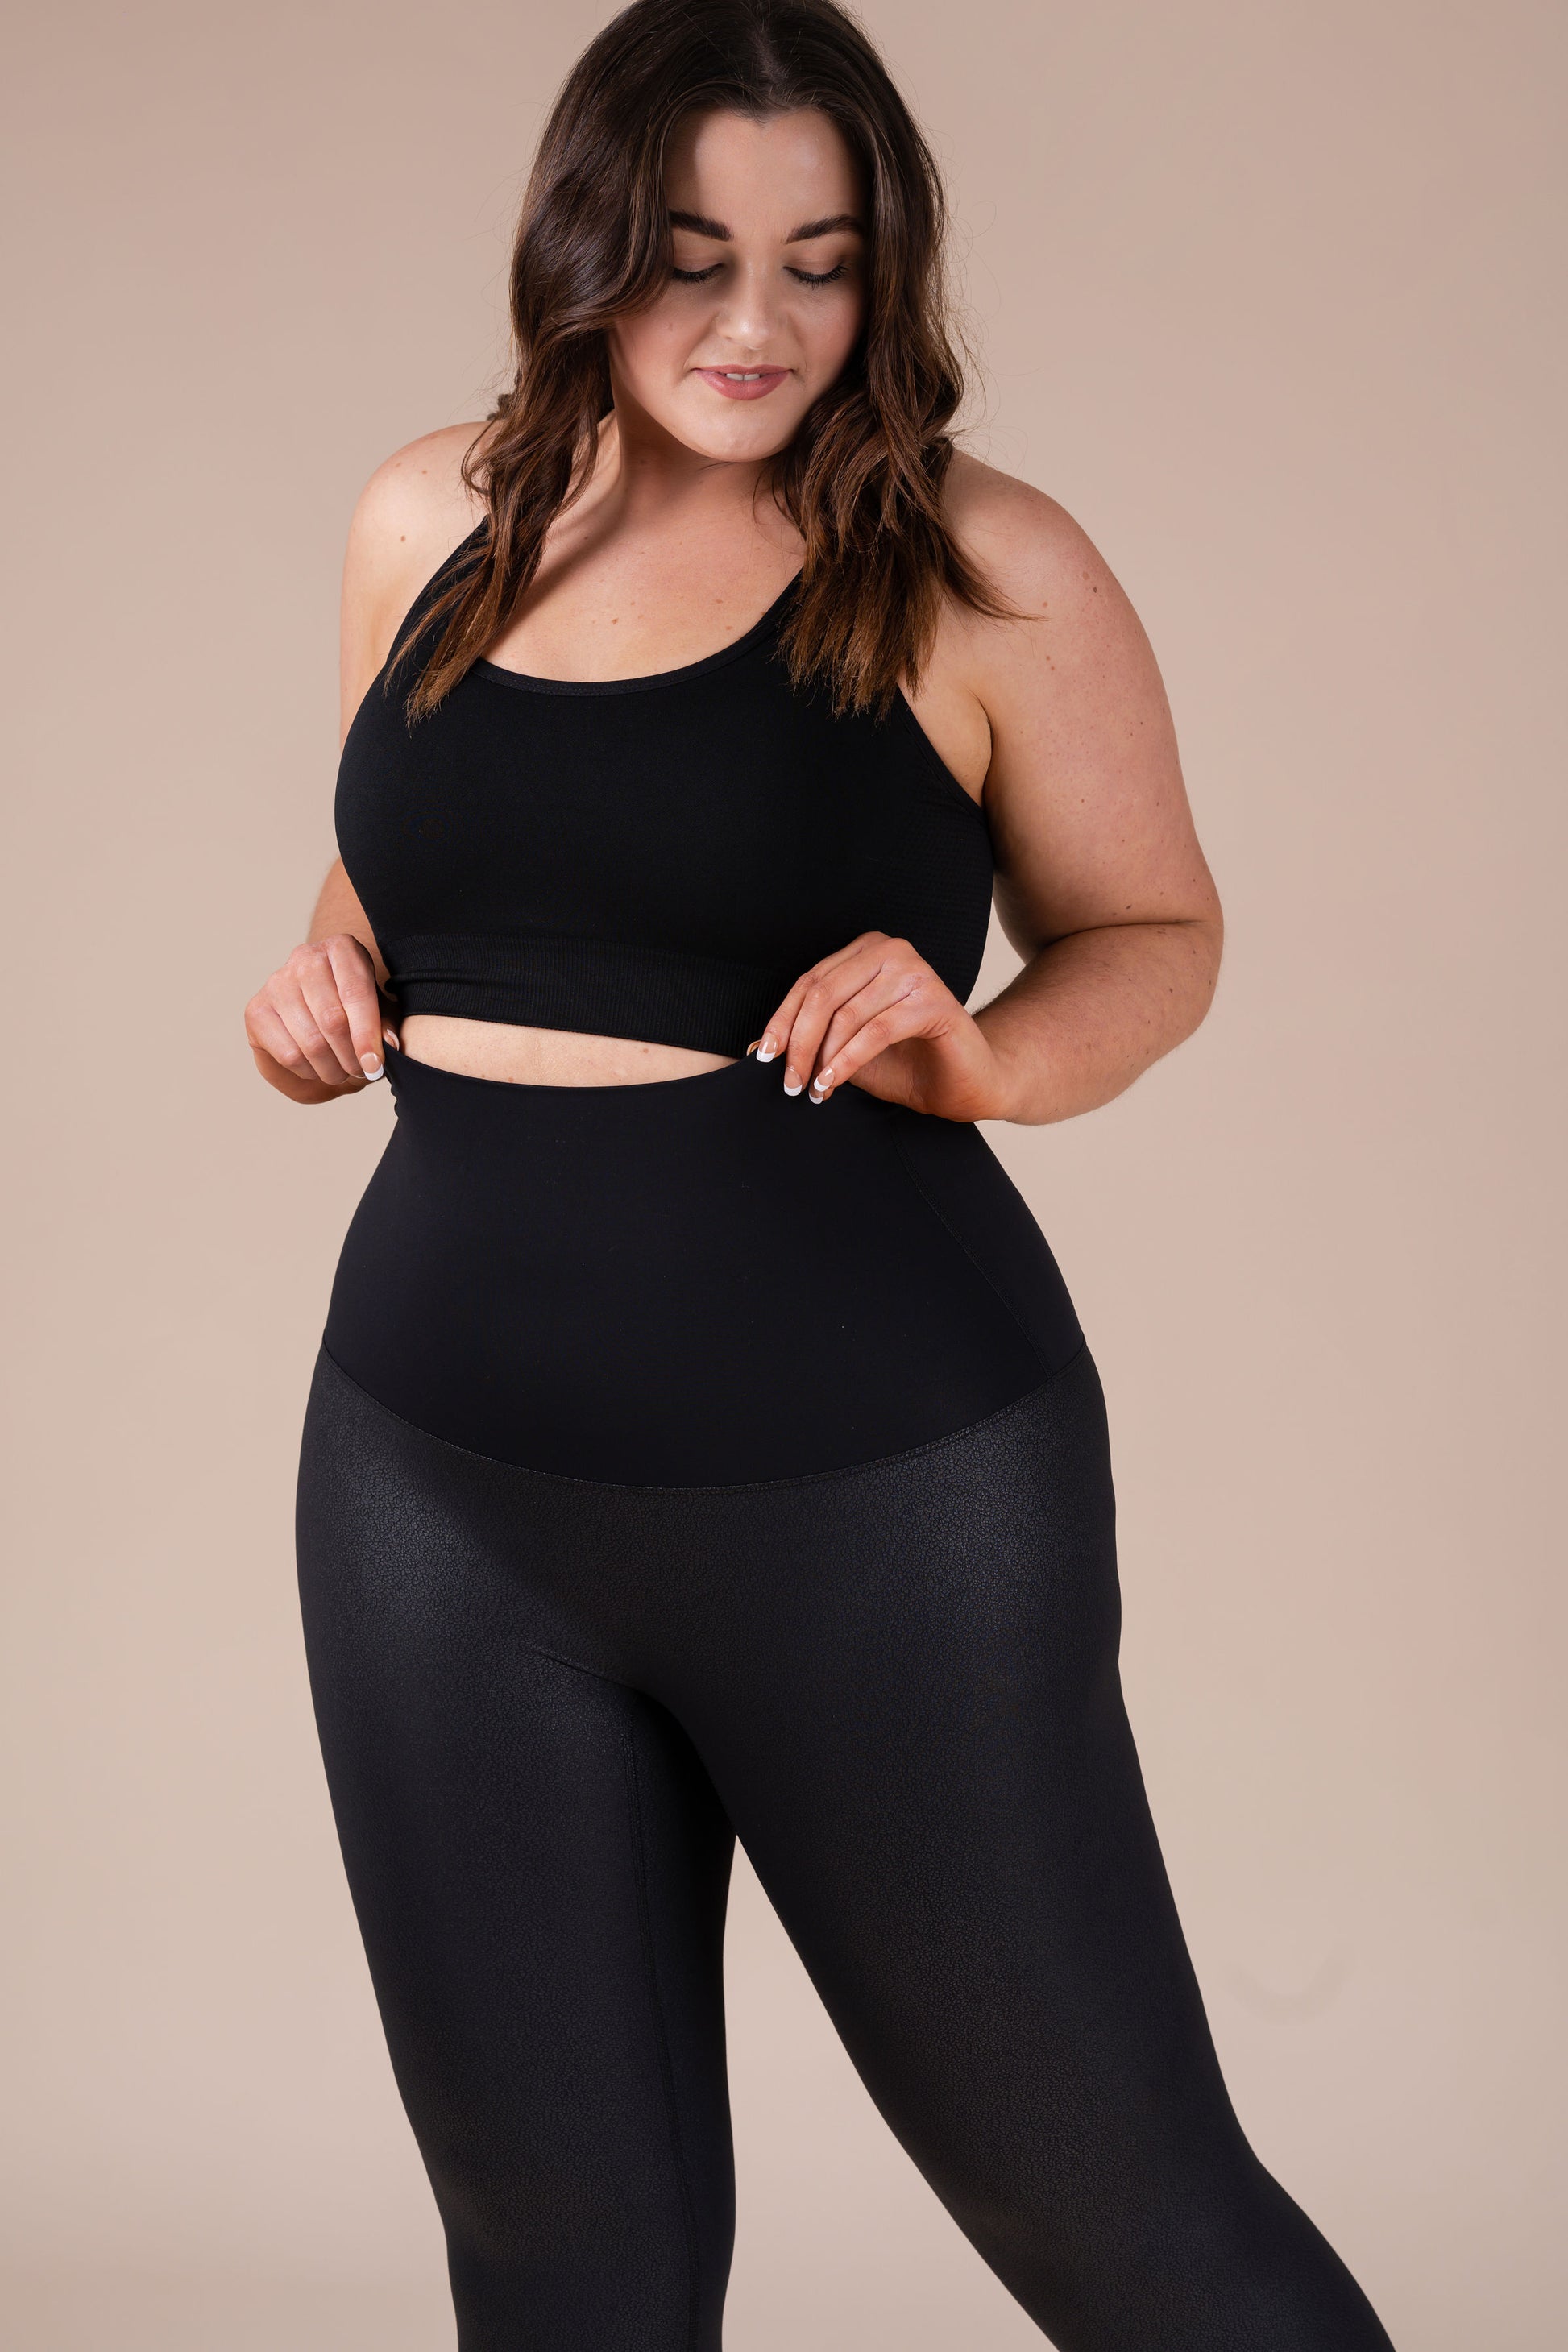 Spanx Takes Off High Waisted Shaping Leggings 2031 Black S